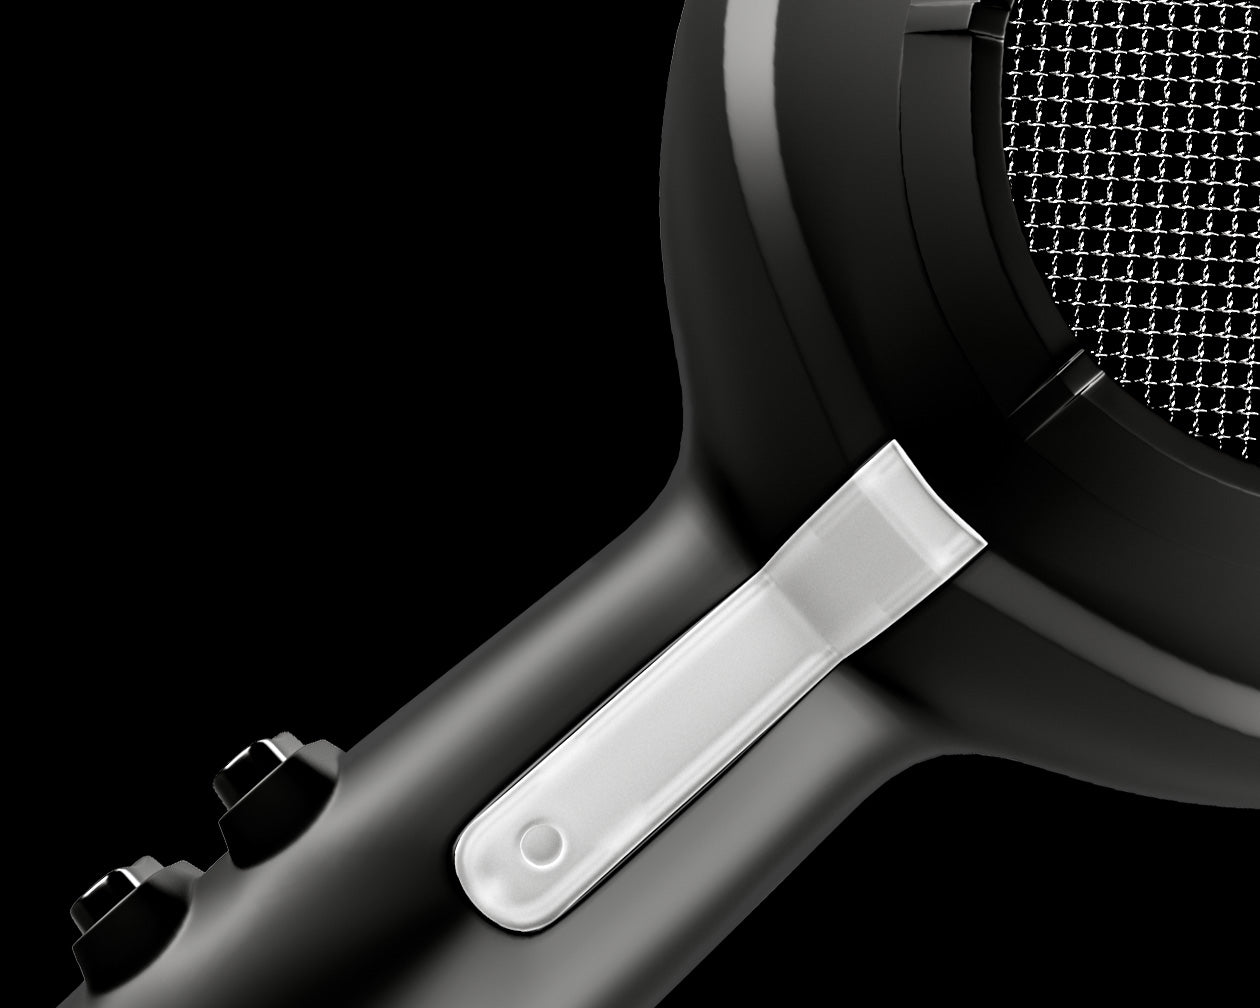 Diagonal image of the back of a black Airshot hair dryer against a black background.